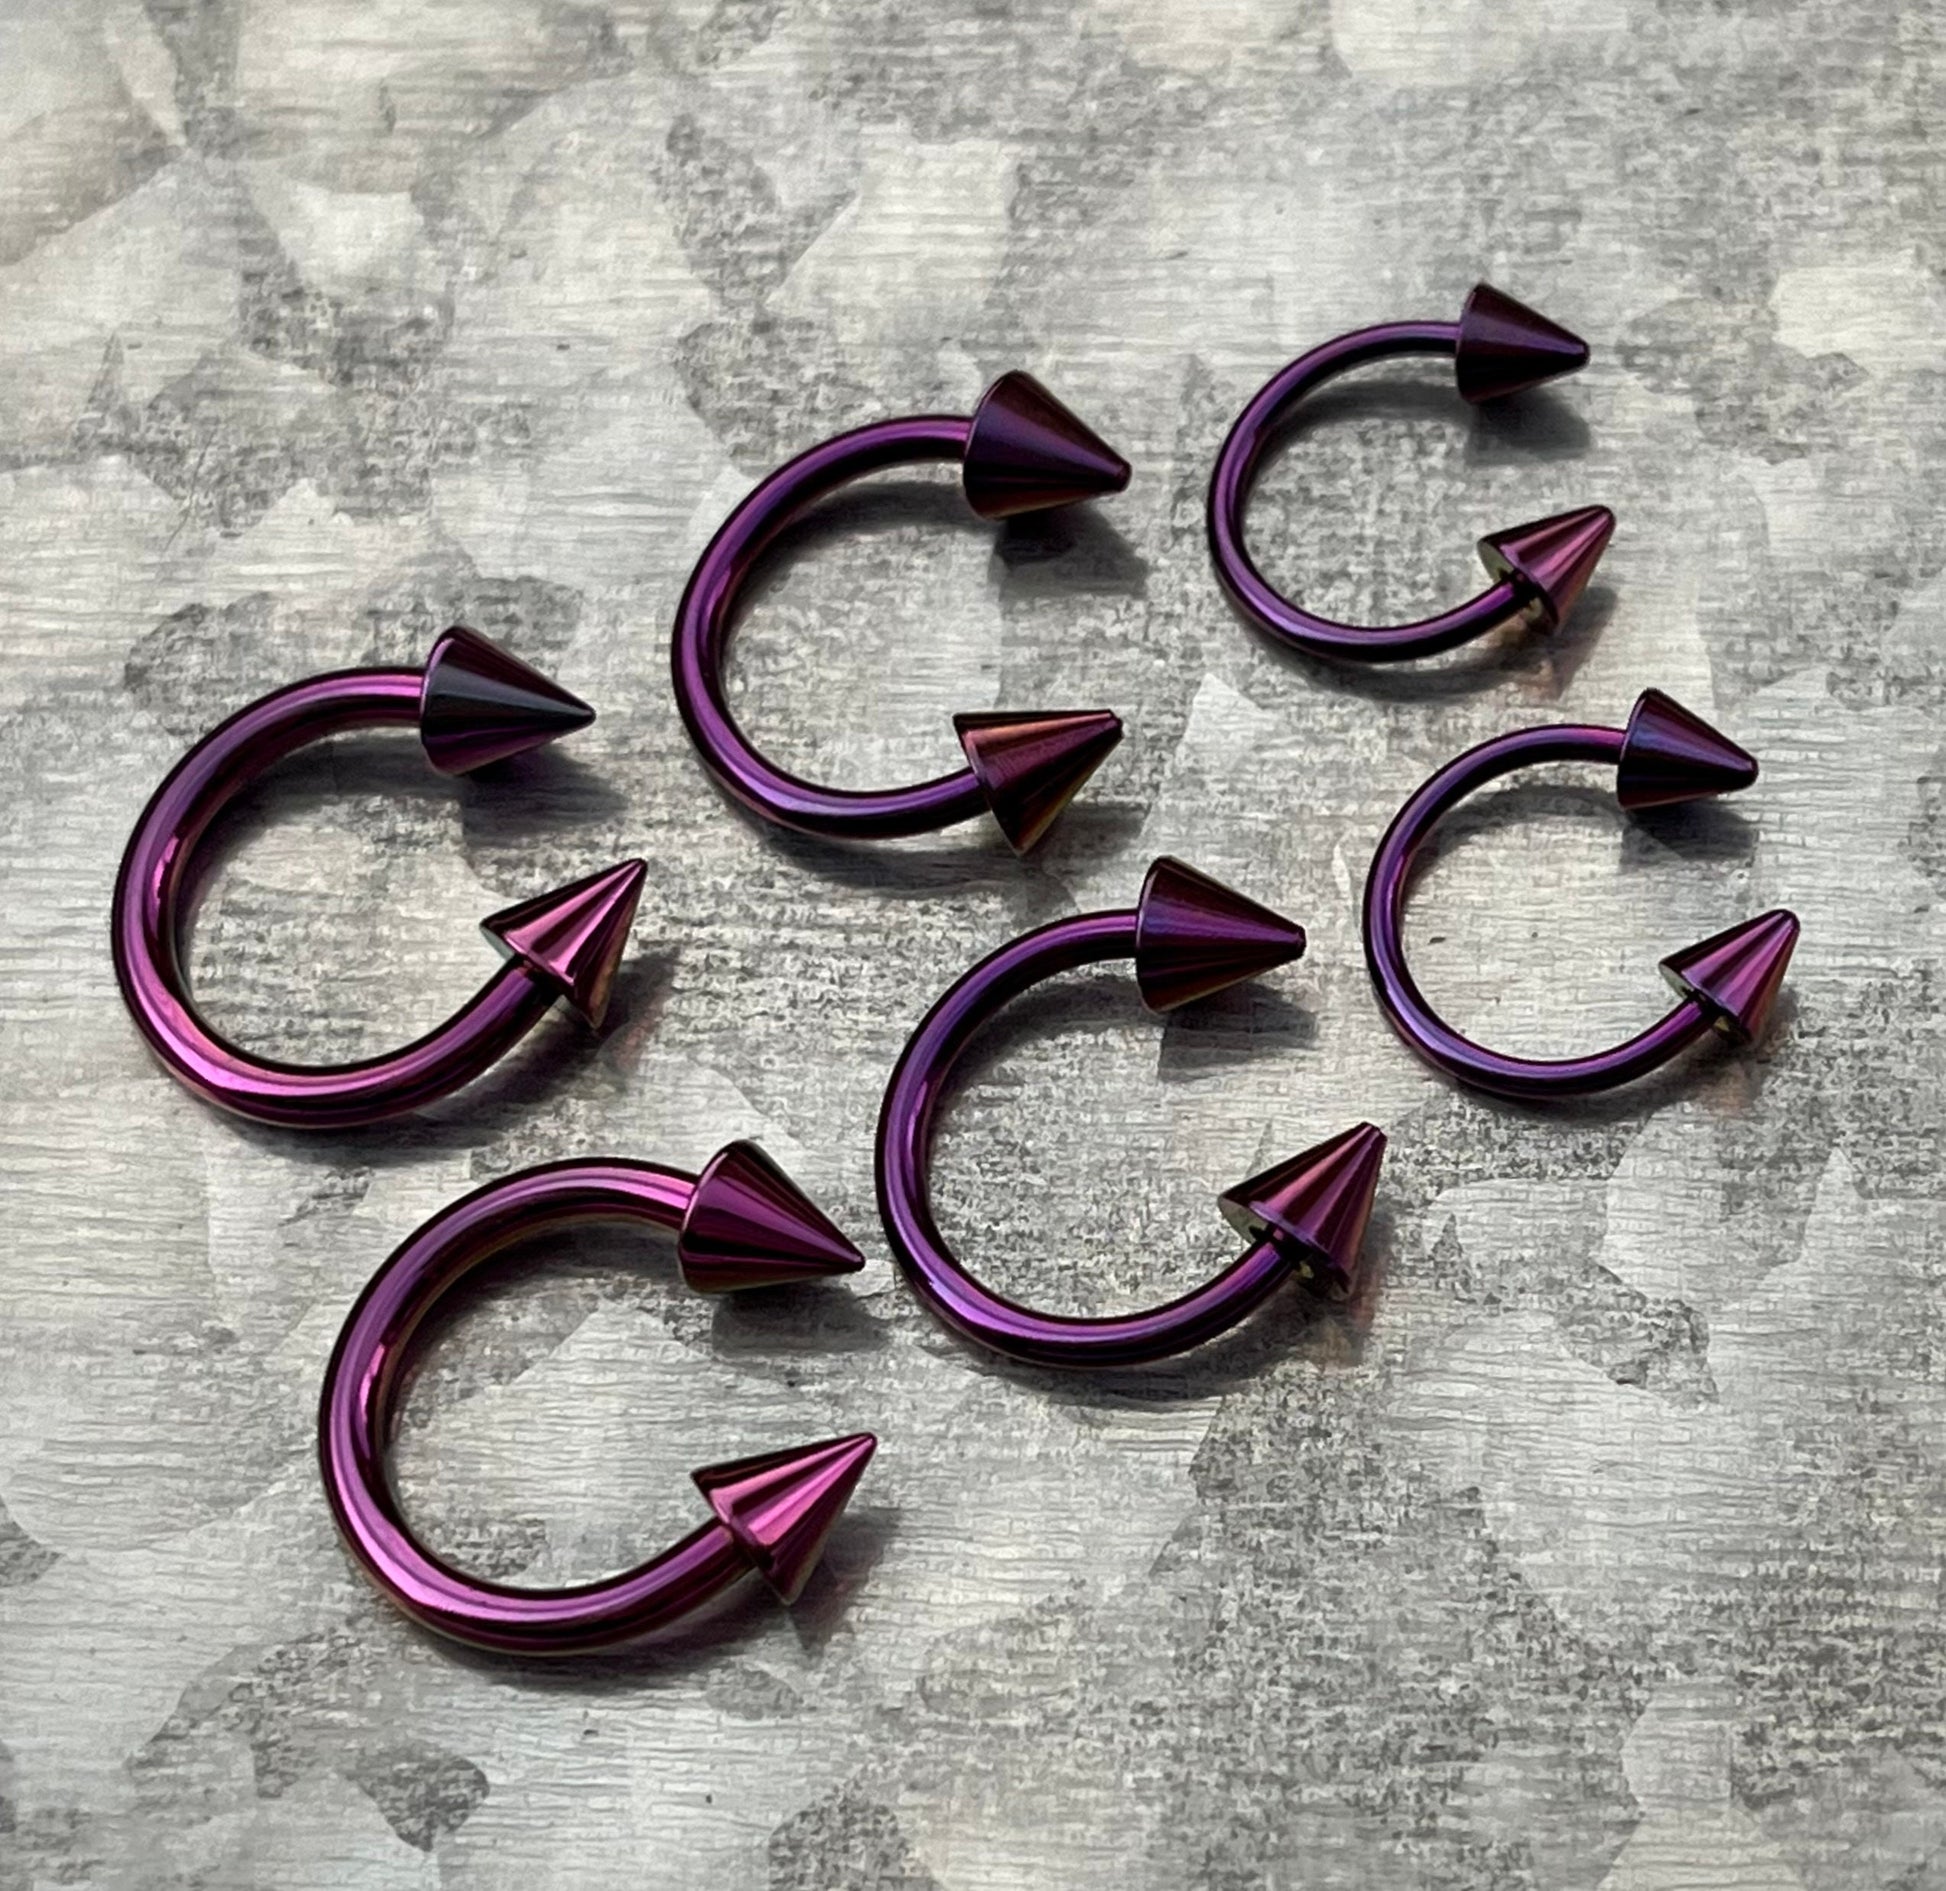 1 Piece Stunning Titanium Spiked Barbell Horseshoe Ring - 16g thru 12g - OTHER Colors Available in our listings!